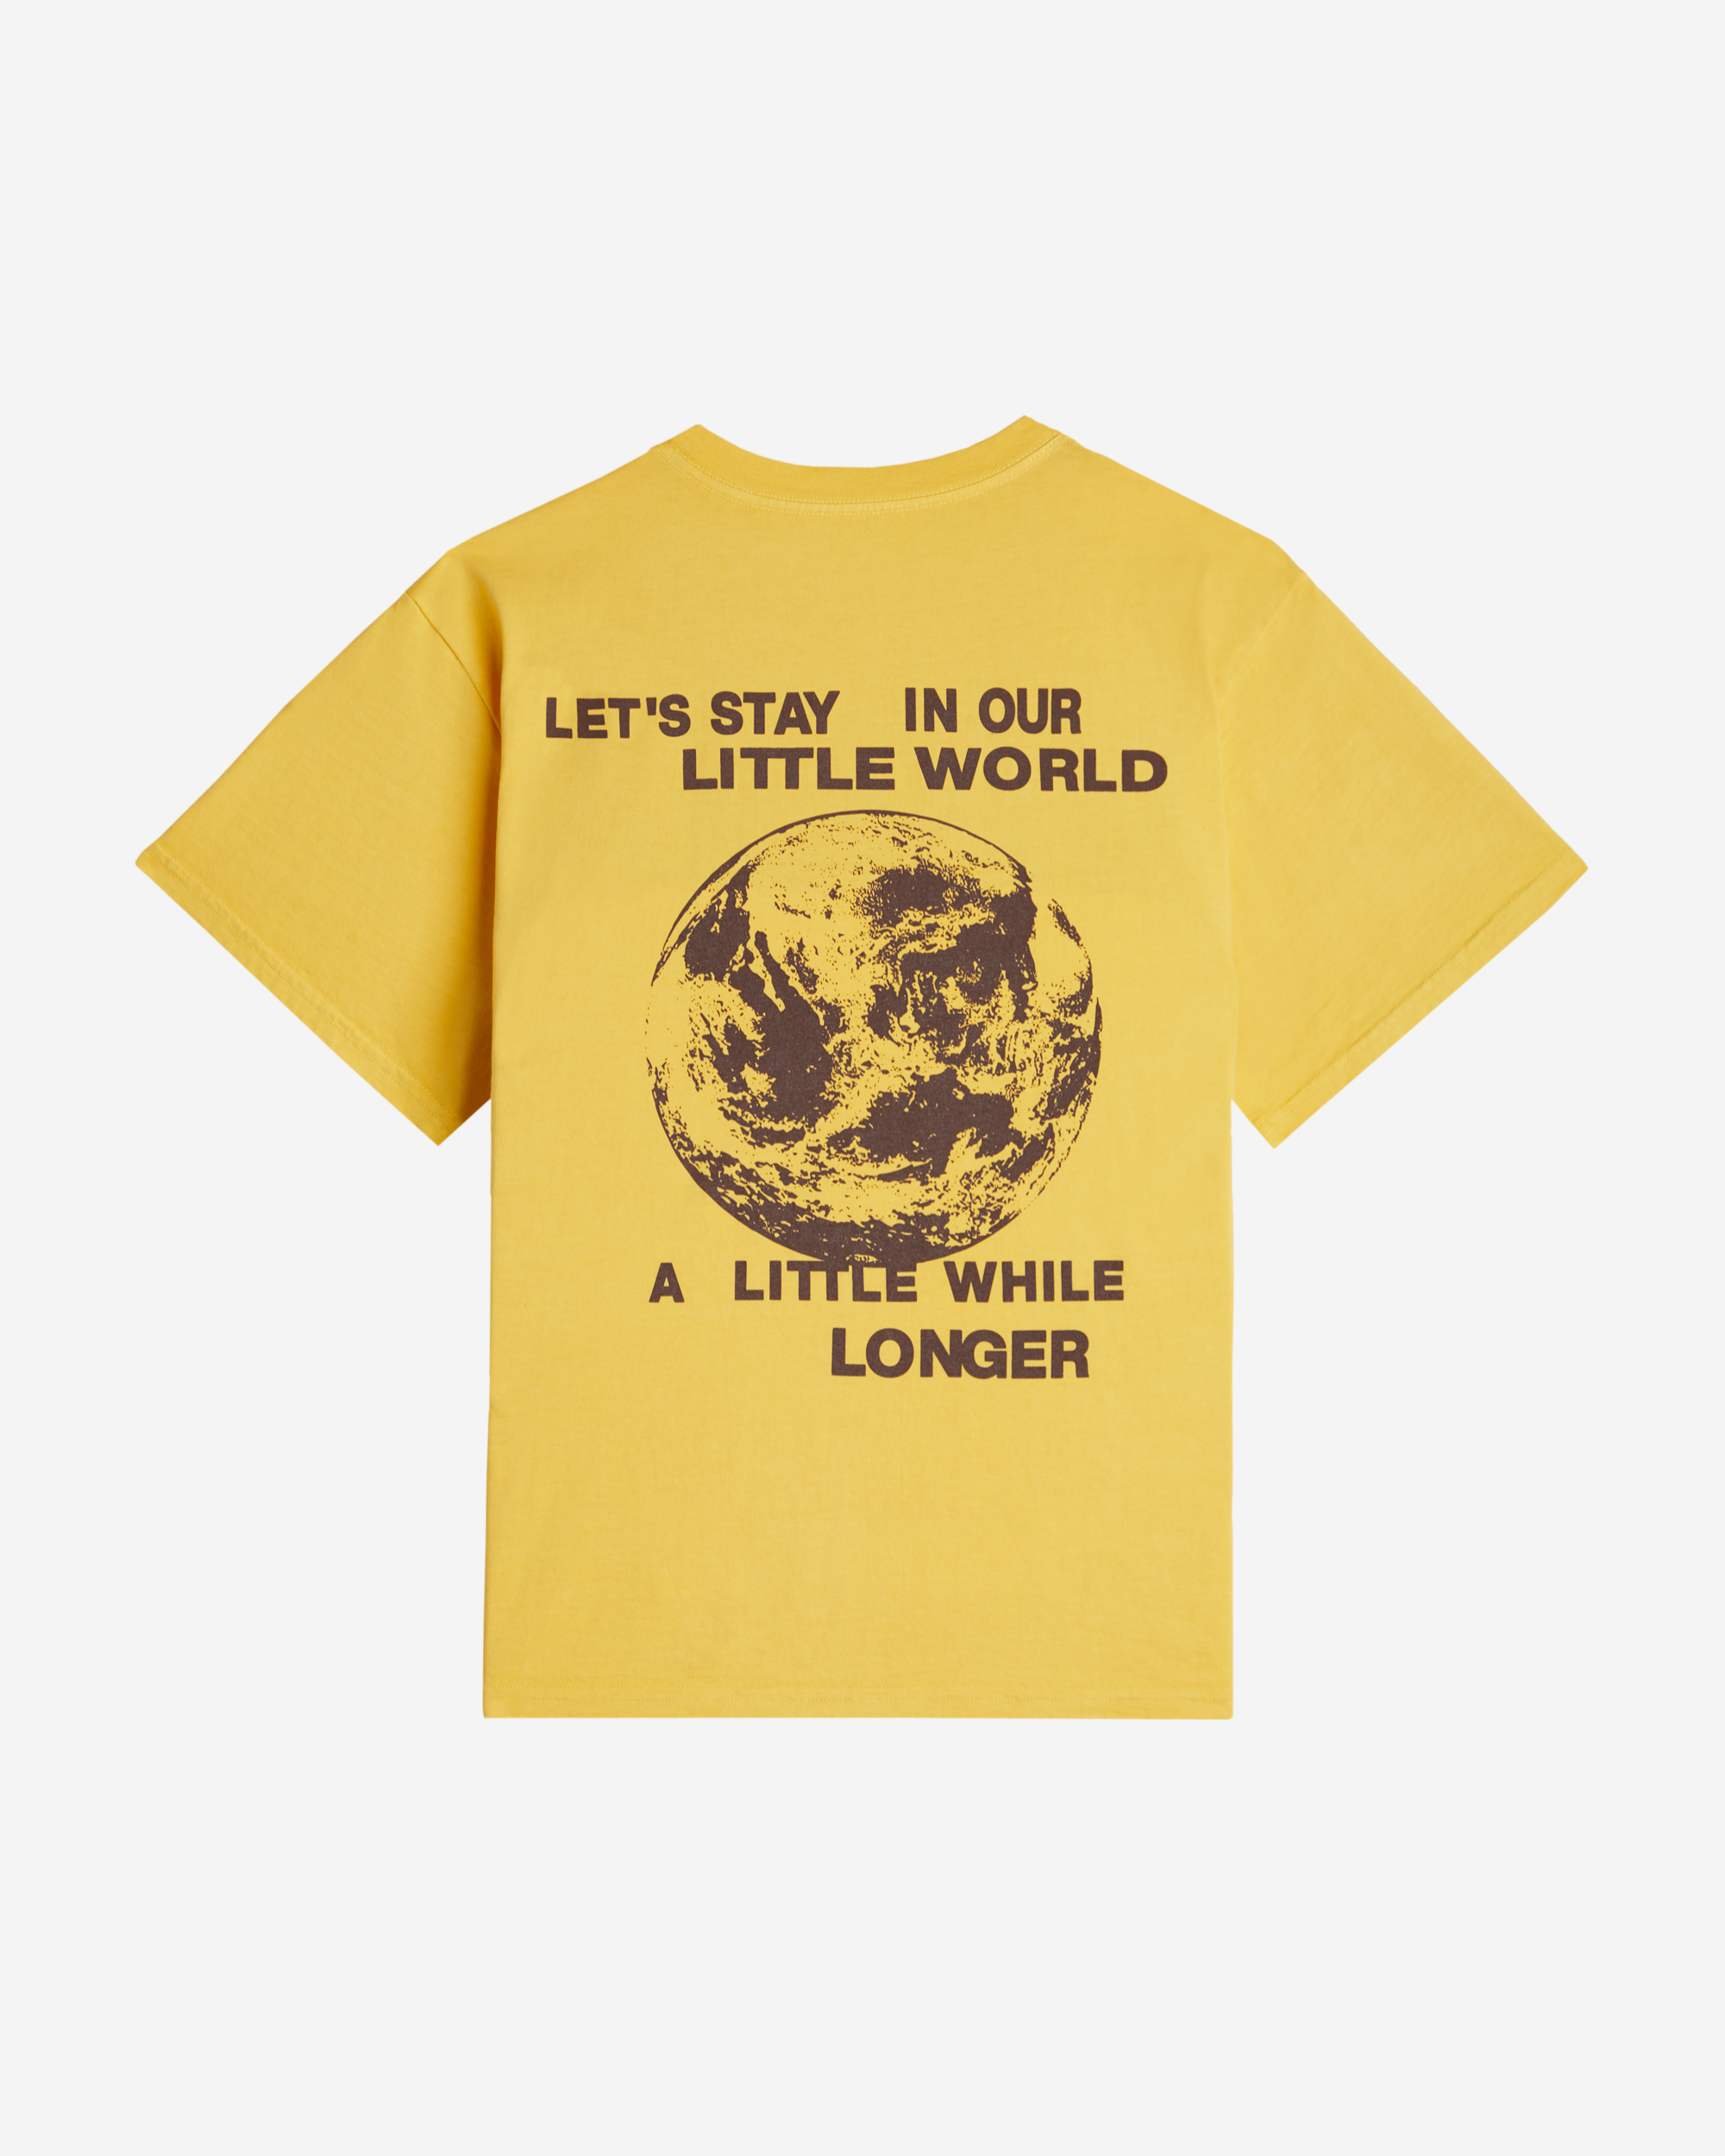 Our Little World Tee